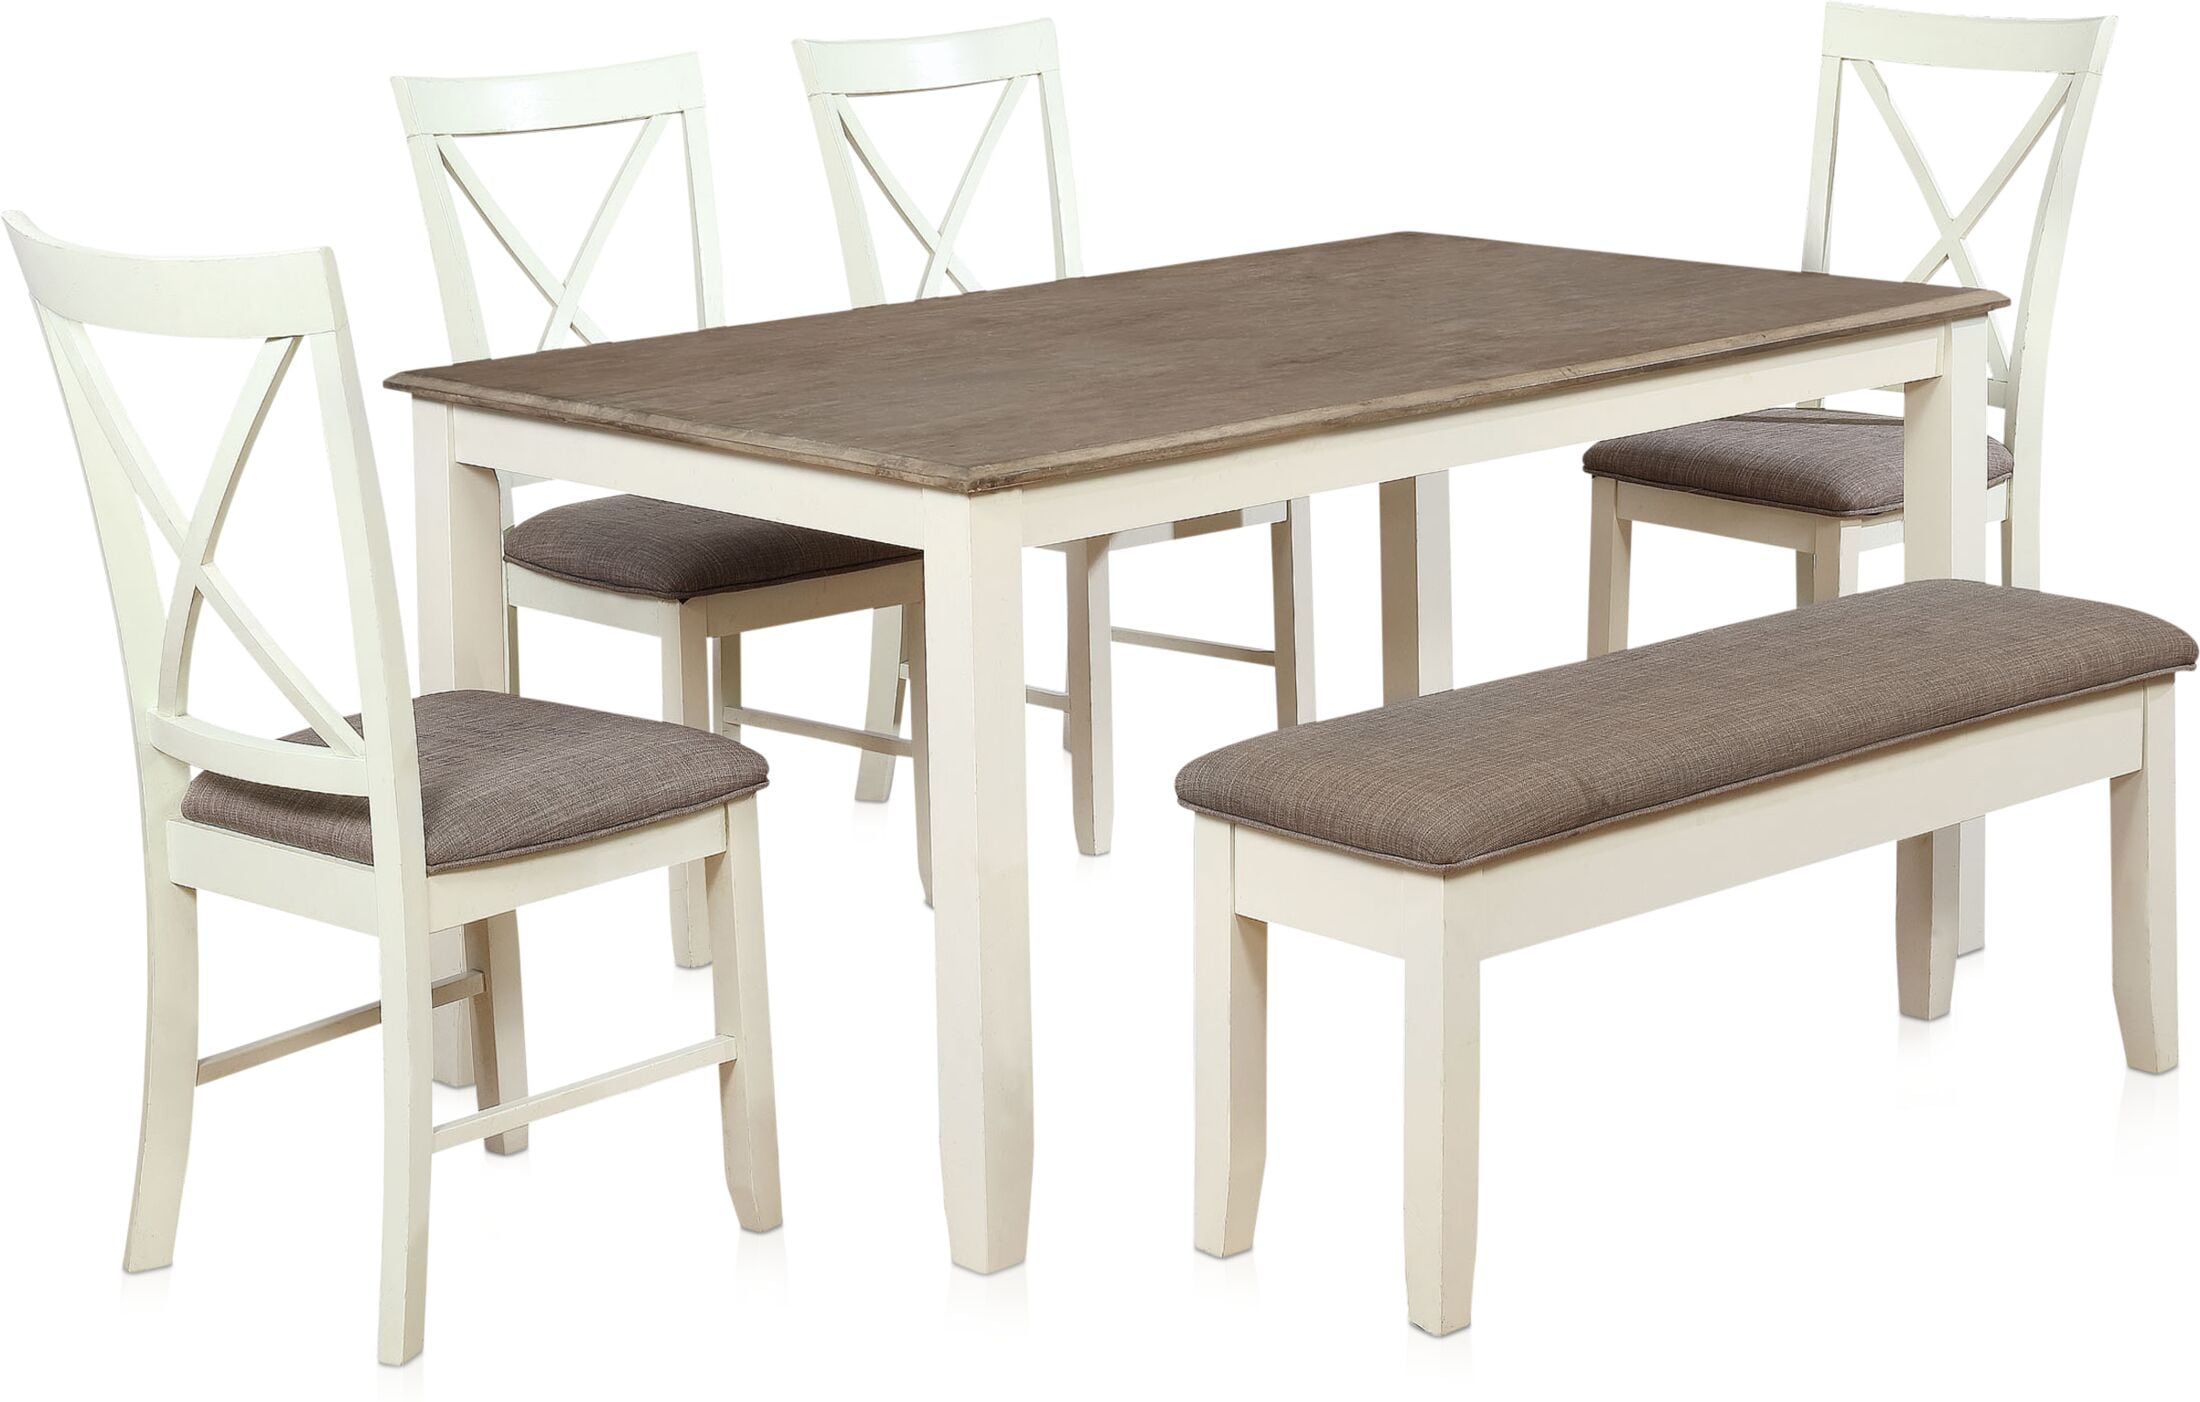 Bassett Dining Table 4 Chairs And Bench Value City Furniture